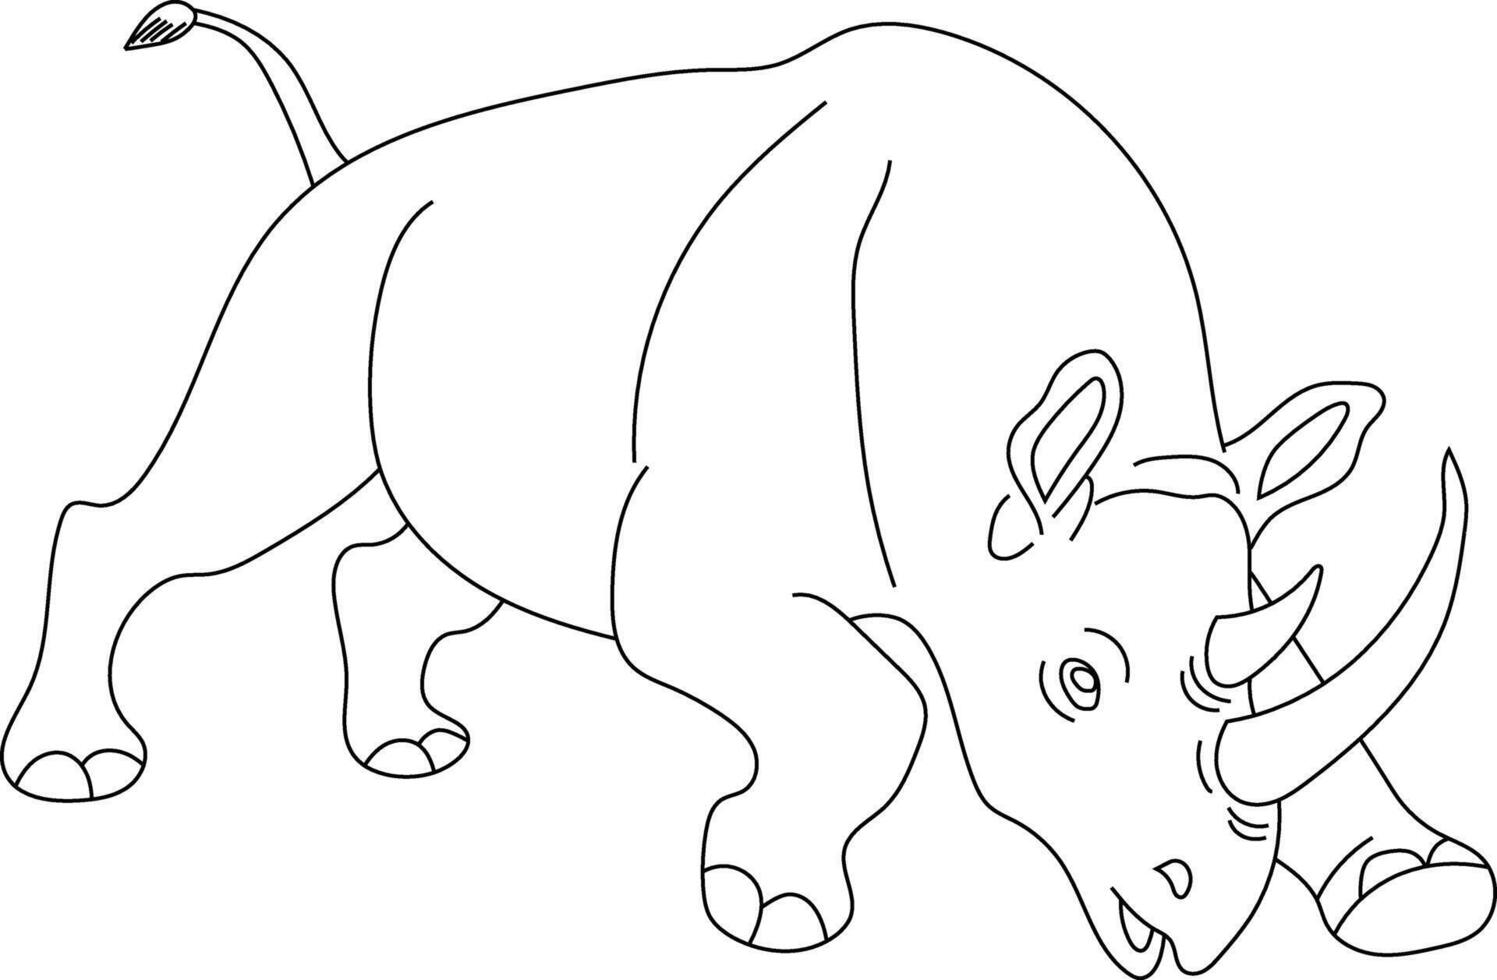 Outline Rhino Clipart. Doodle Animals Clipart. Cartoon Wild Animals Clipart for Lovers of Wildlife vector